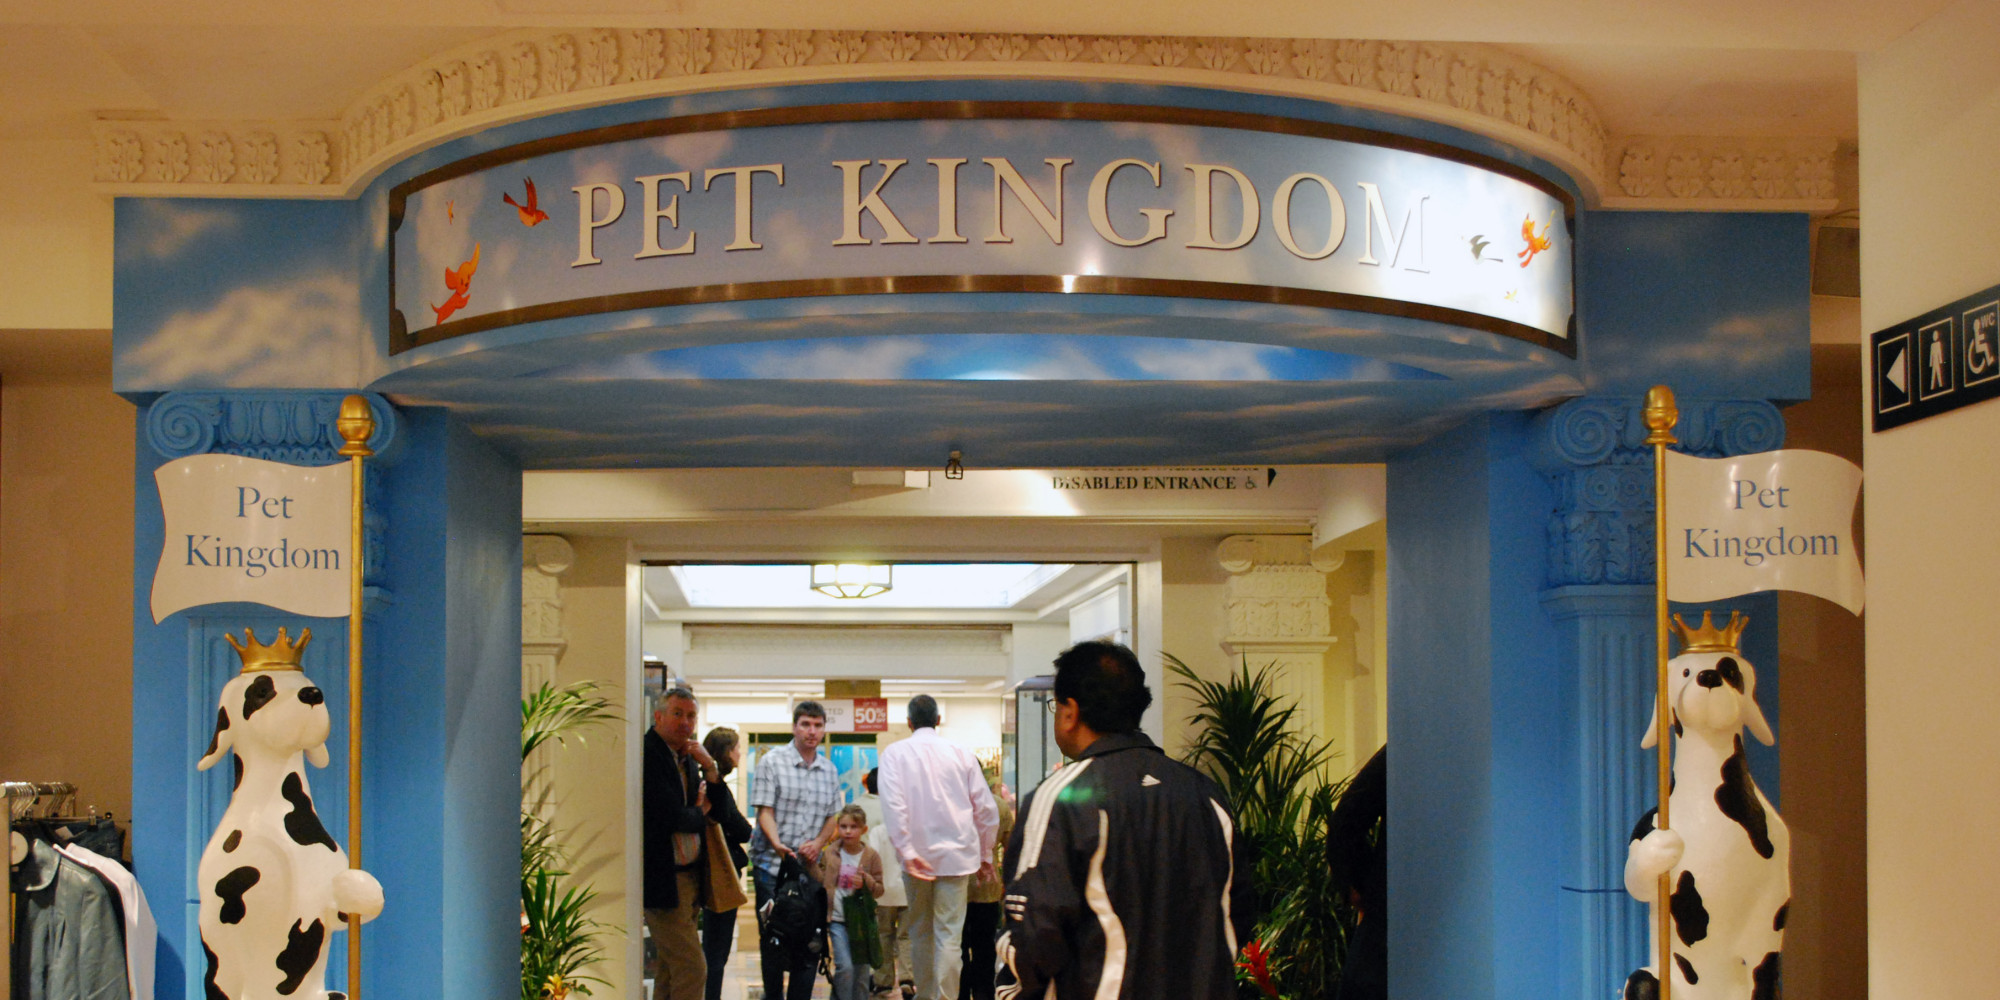 Harrods To Close Famous Pet Kingdom That Sold Baby Elephants And